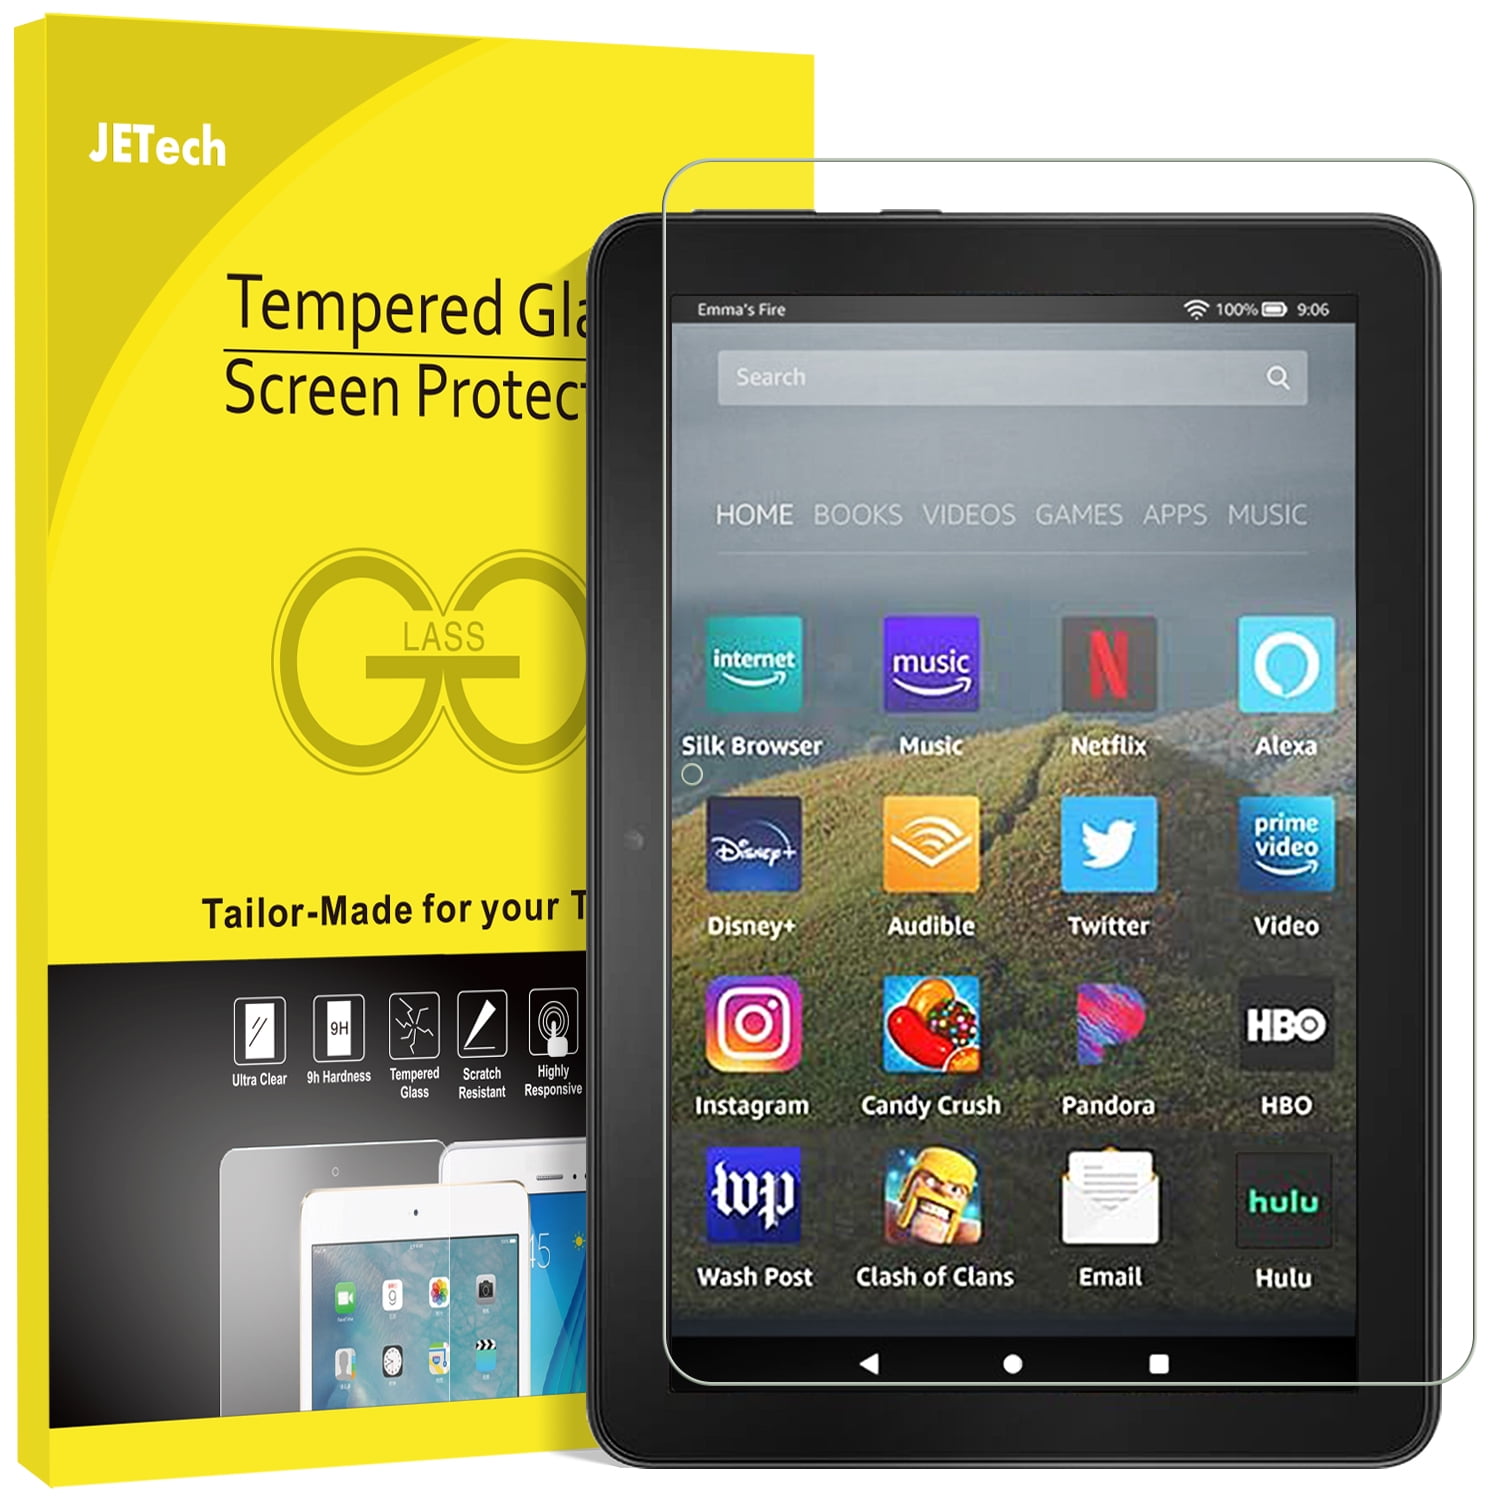 Tempered Glass Screen Protector Guard Shield Cover For Amazon Kindle Fire 6 7 8 